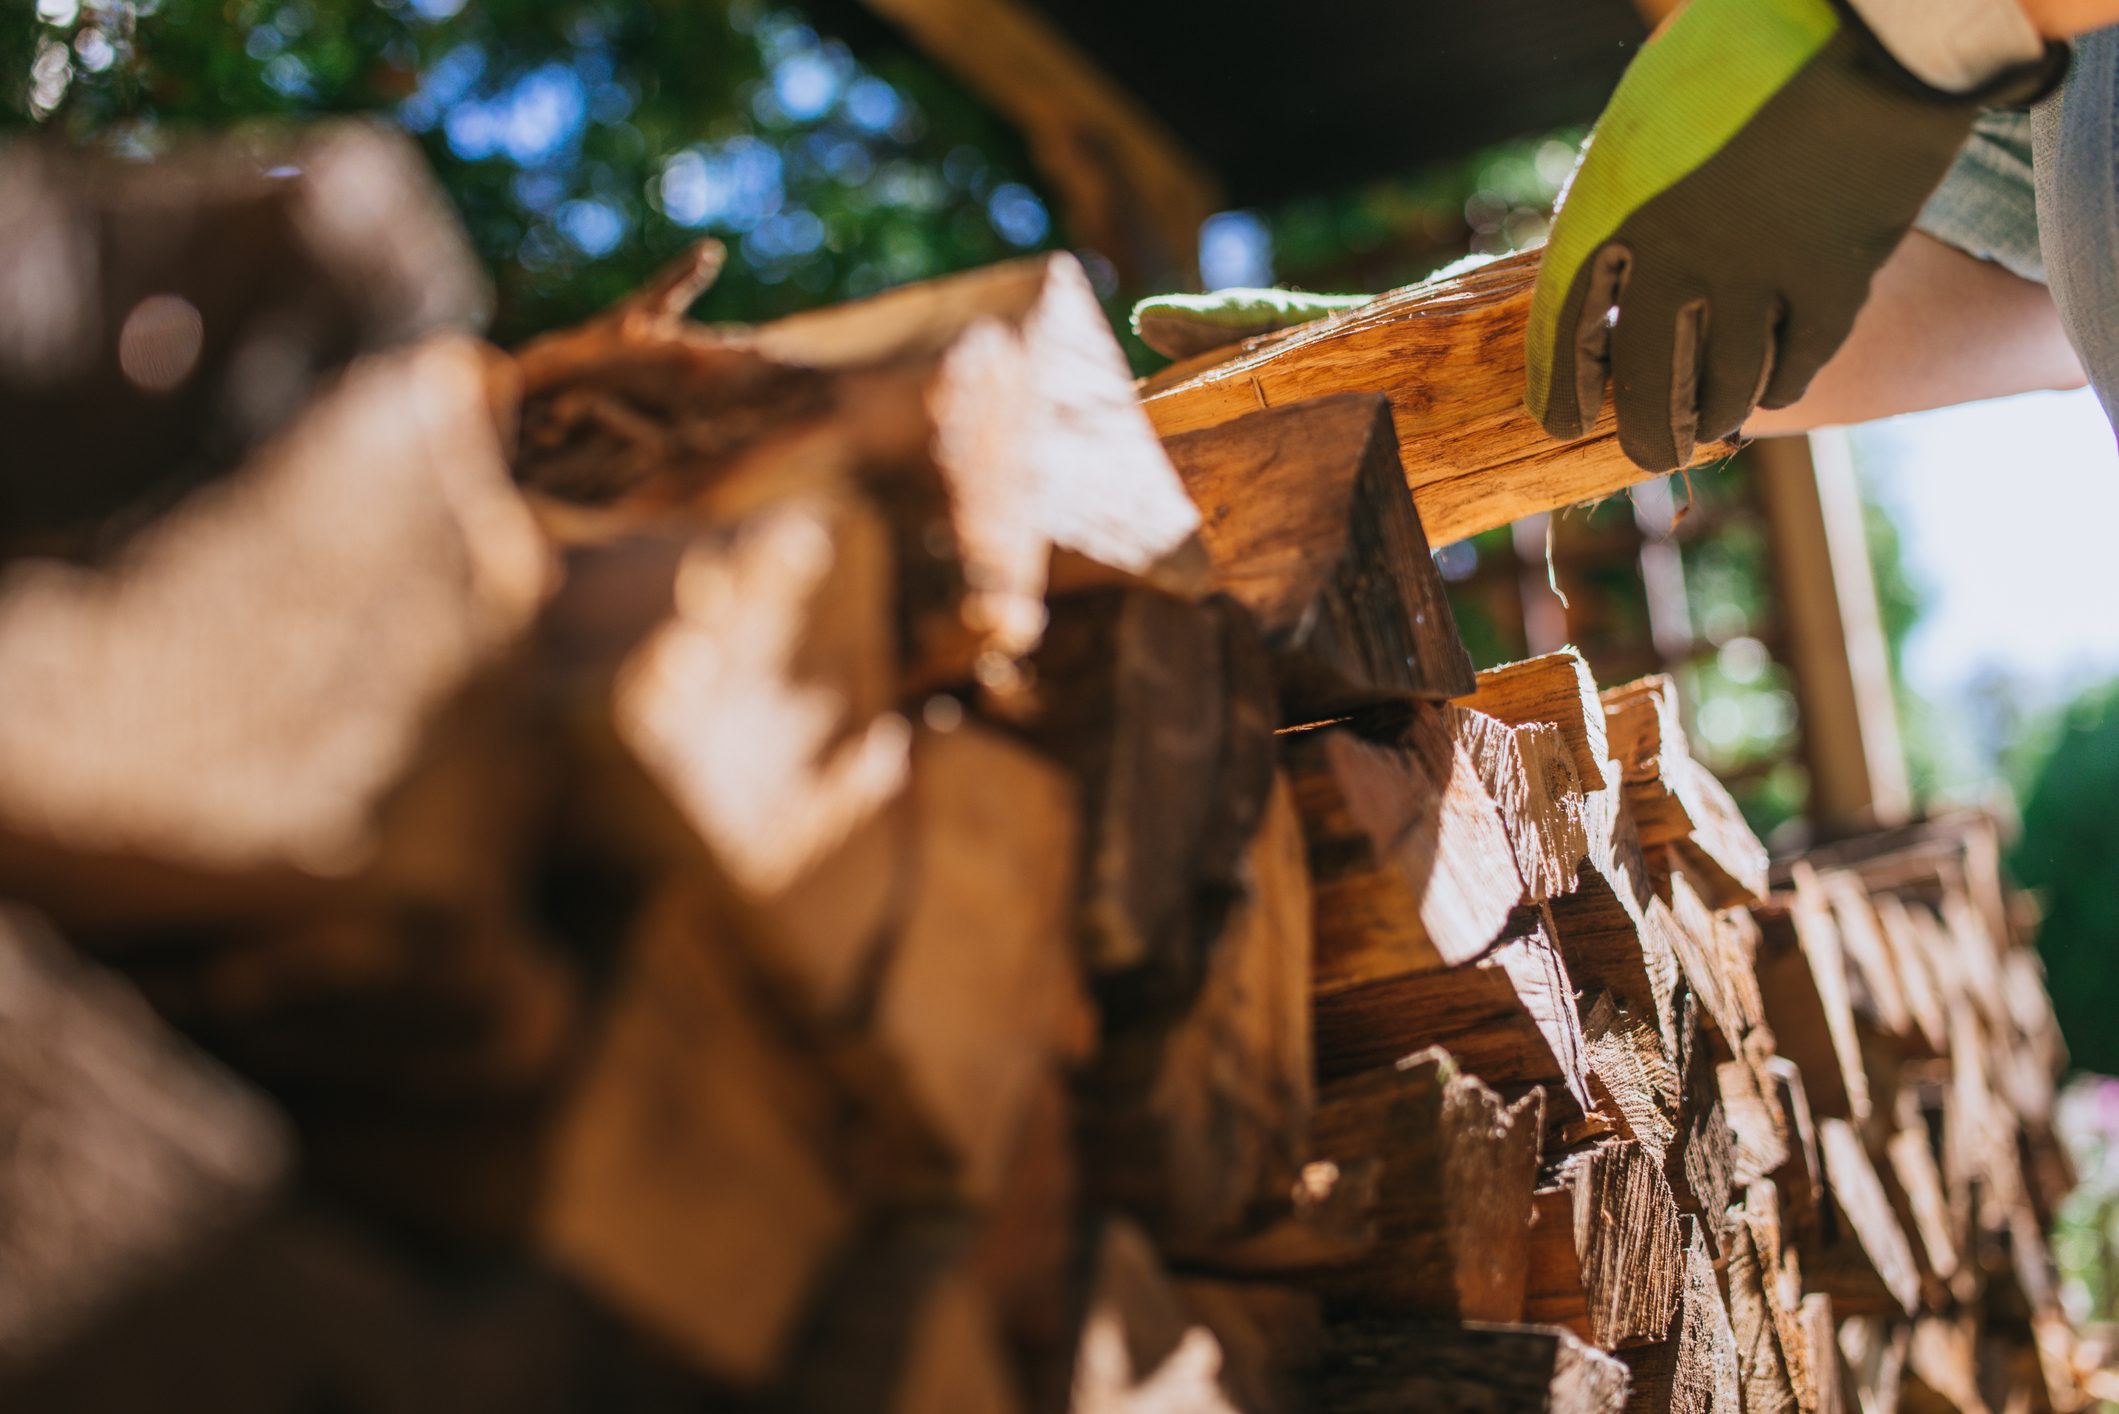  How Long Should You Dry Firewood?